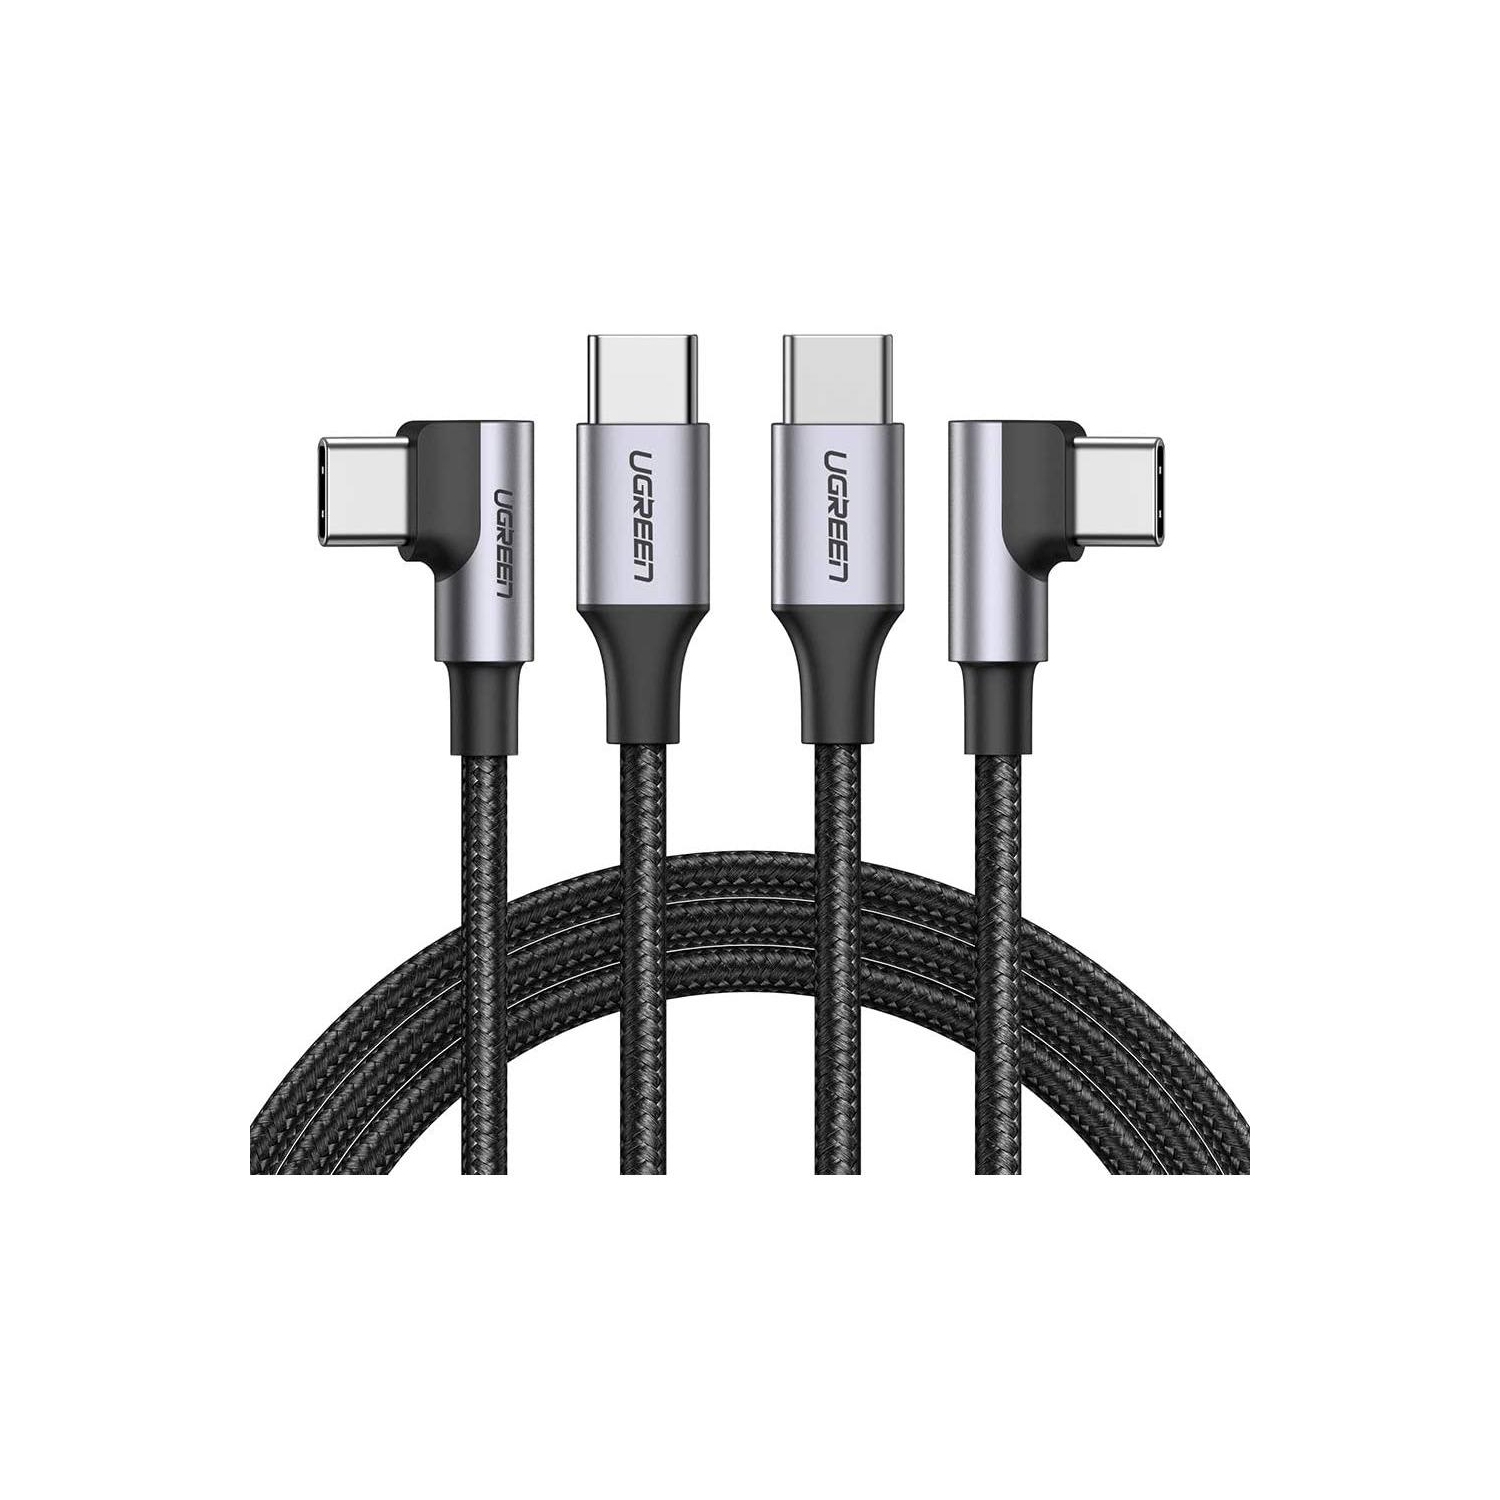 USB C to C cable right angle, 2 pack Type C 60W PD fast 6 feet UGREEN